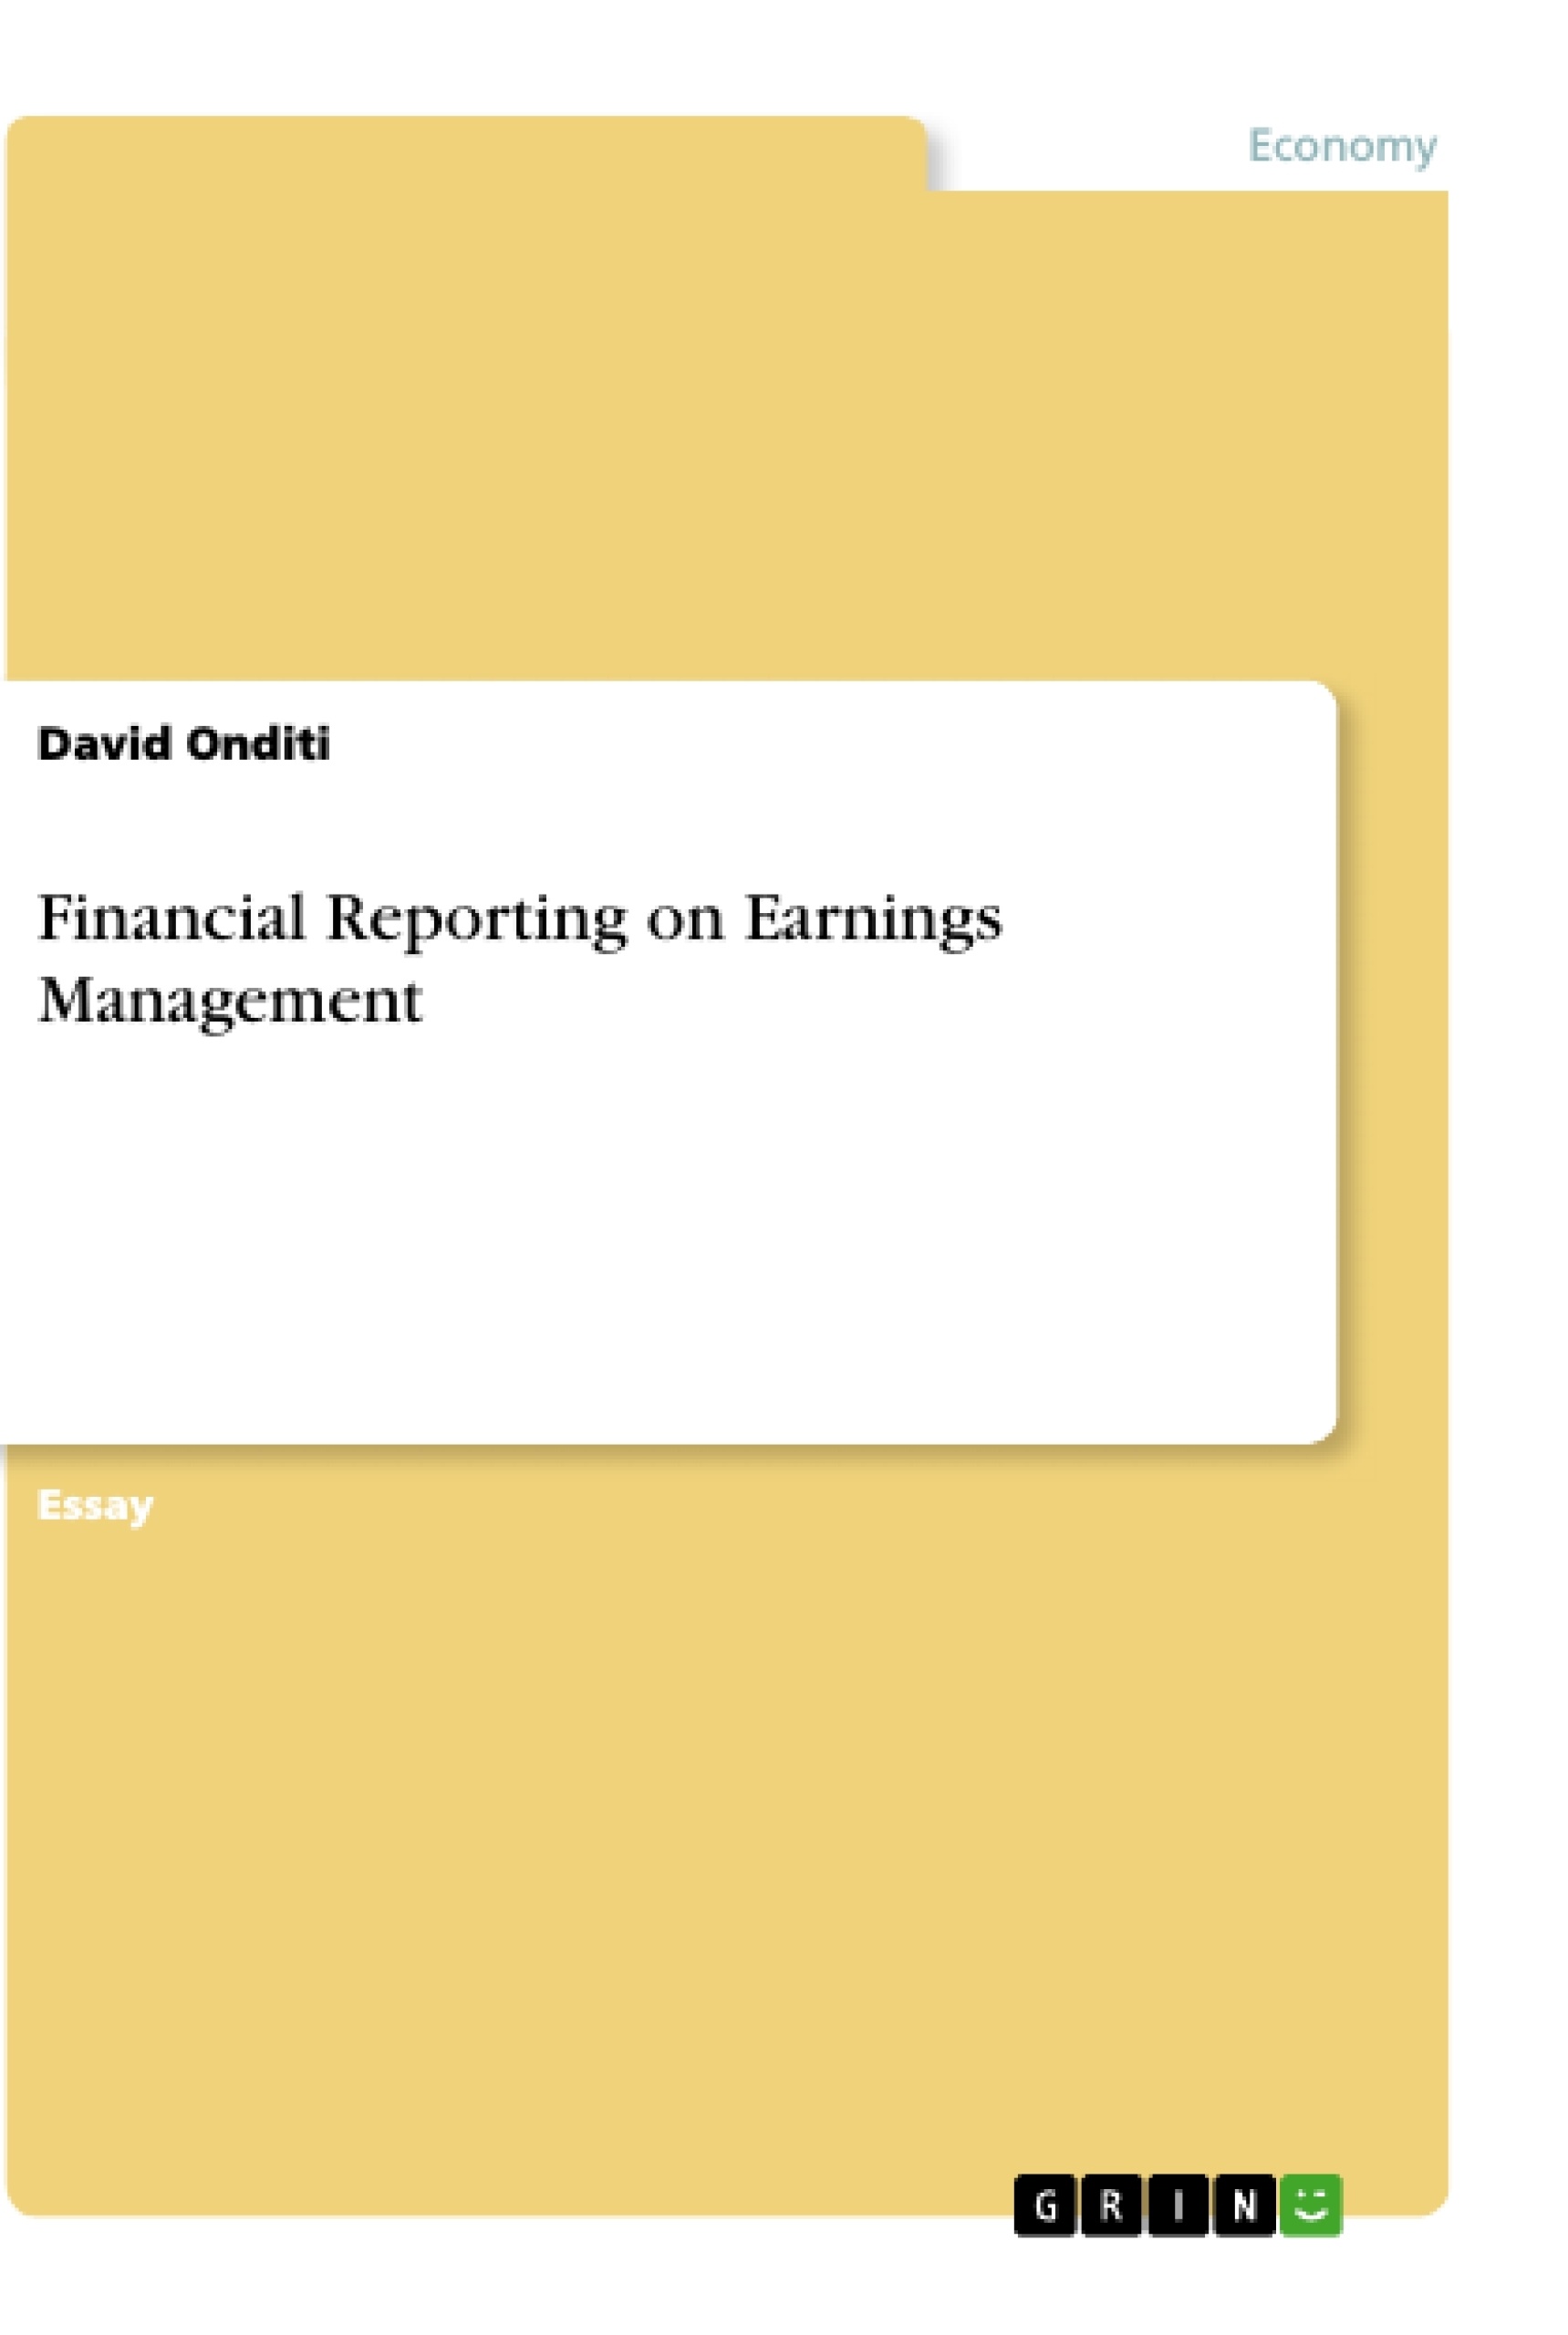 Title: Financial Reporting on Earnings Management